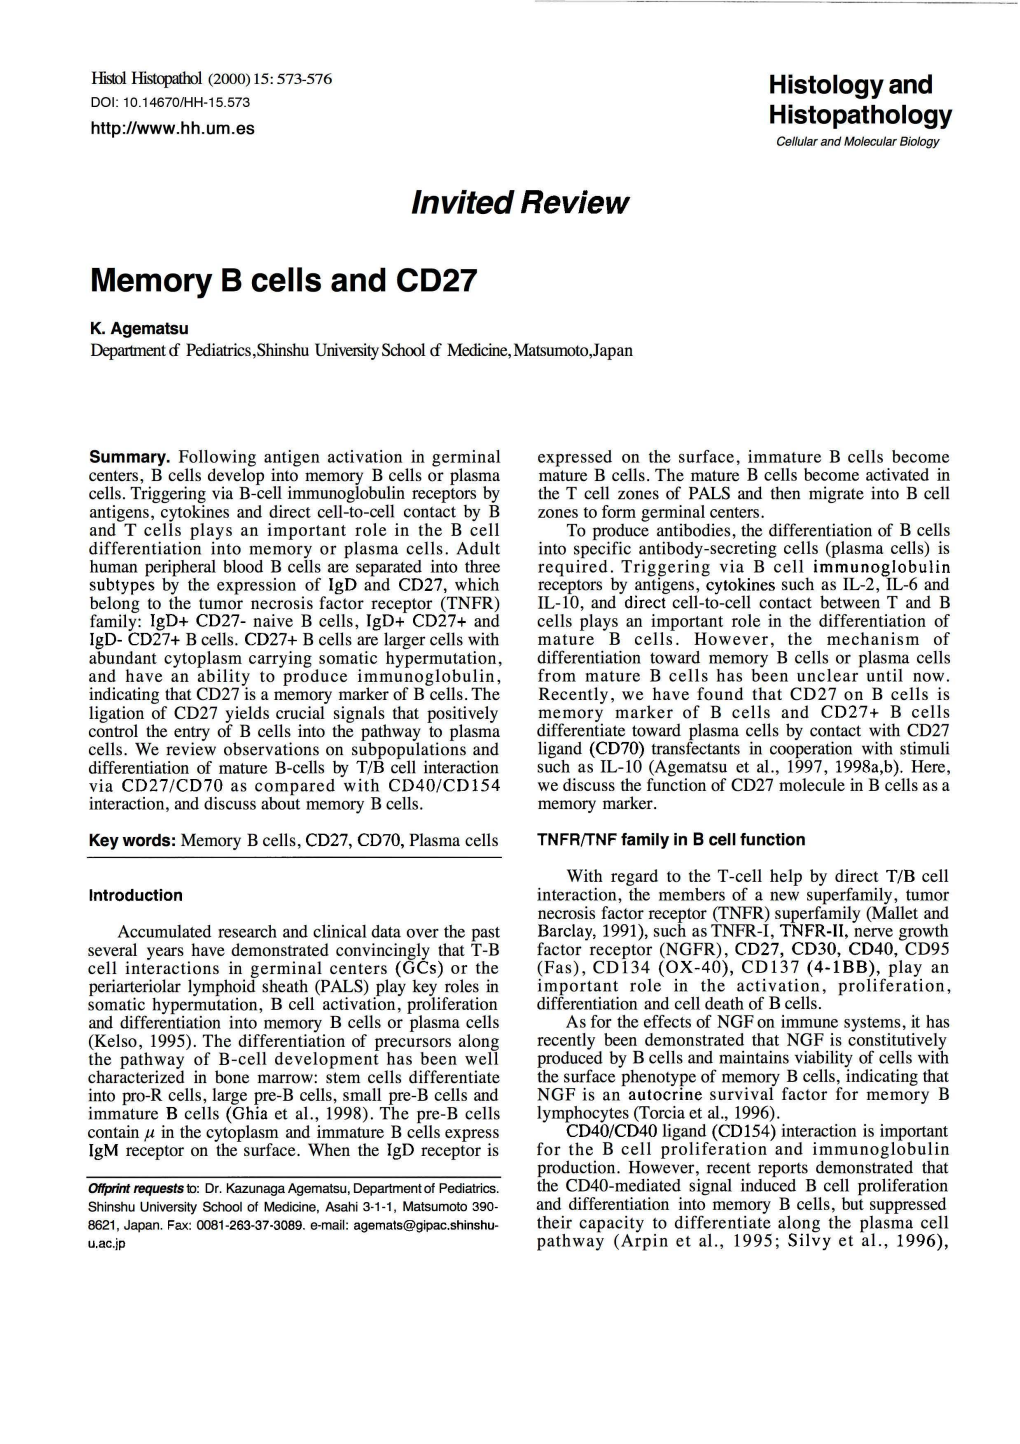 Lnvited Review Memory B Cells and CD27